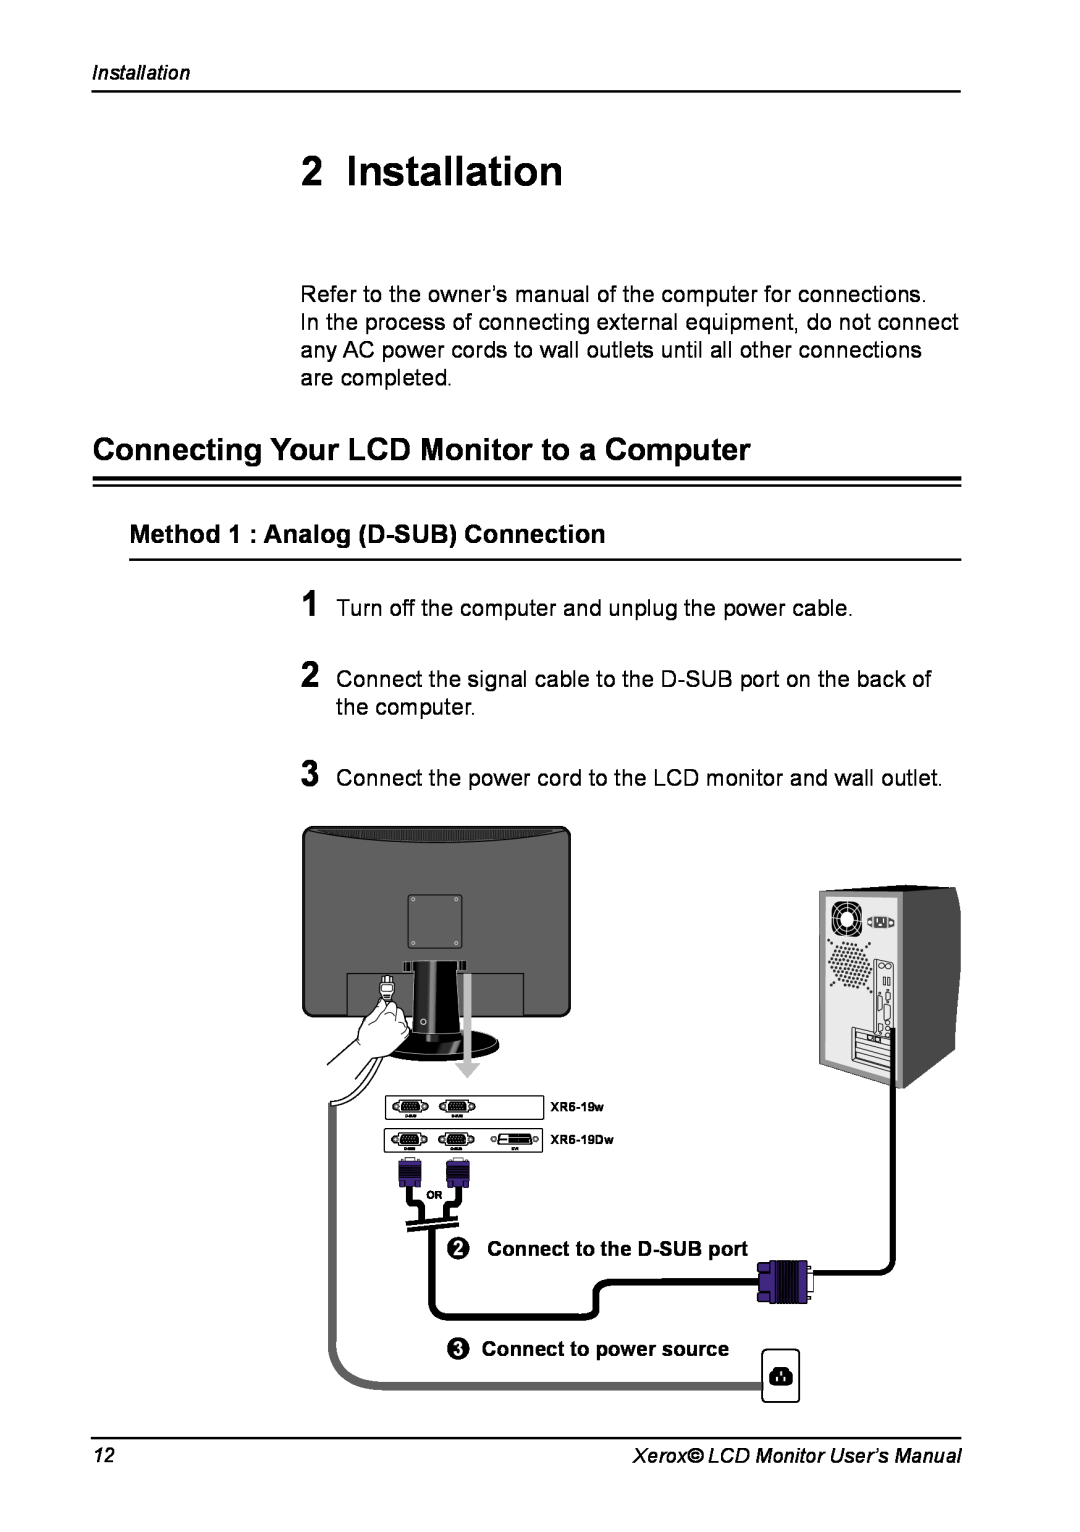 Xerox XR6 Series manual Installation, Connecting Your LCD Monitor to a Computer, Method 1 Analog D-SUBConnection 